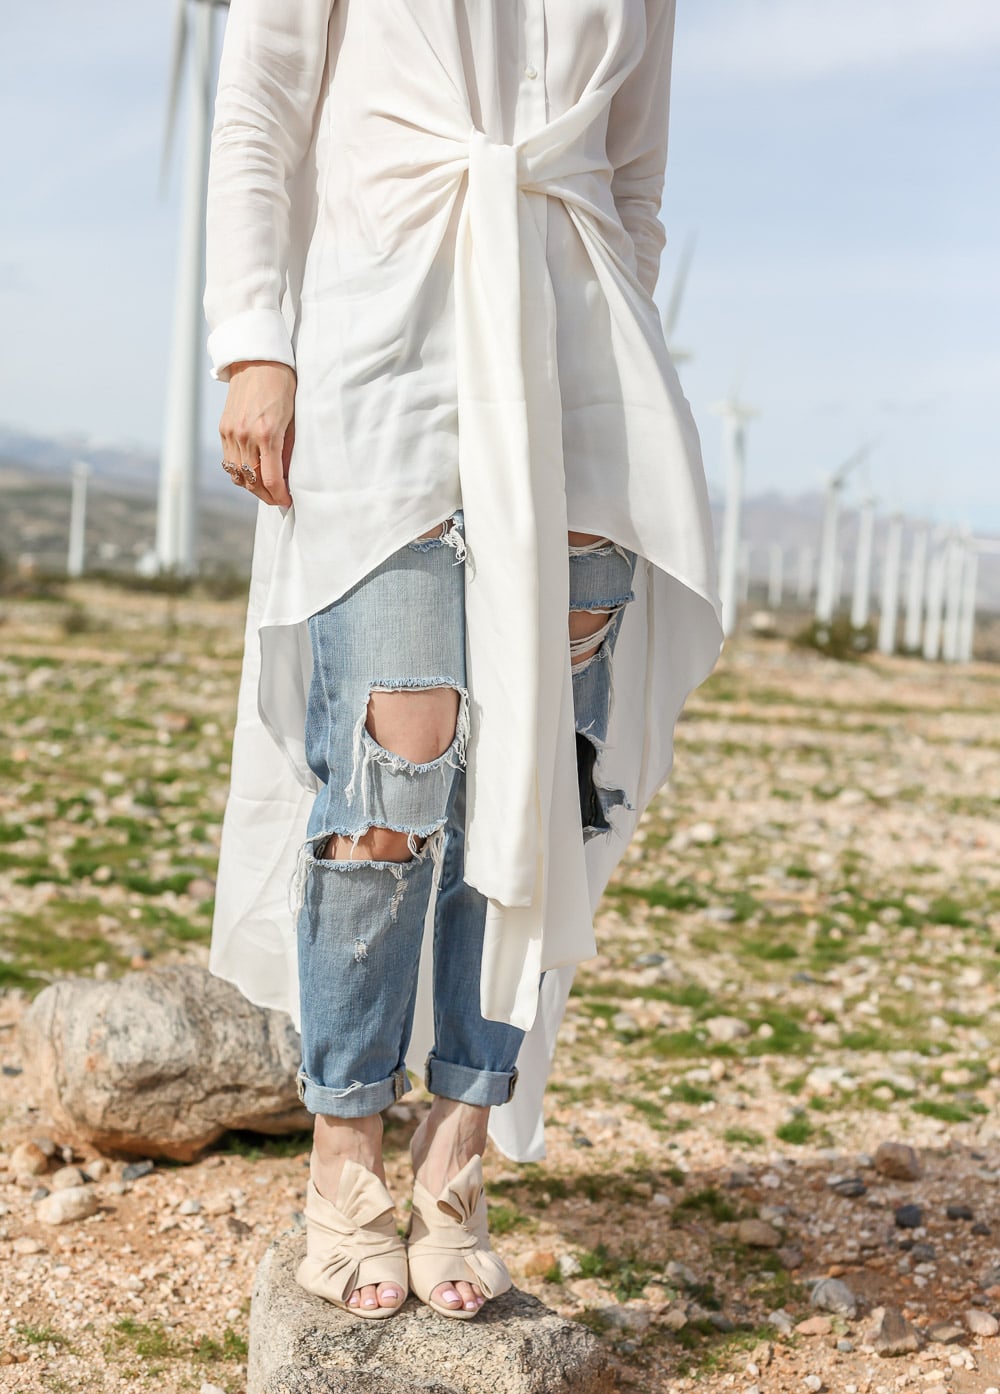 palmer harding waterfall shirt with ripped boyfriend jeans and charlotte olympia ilona bow mules at palms springs wind farm 